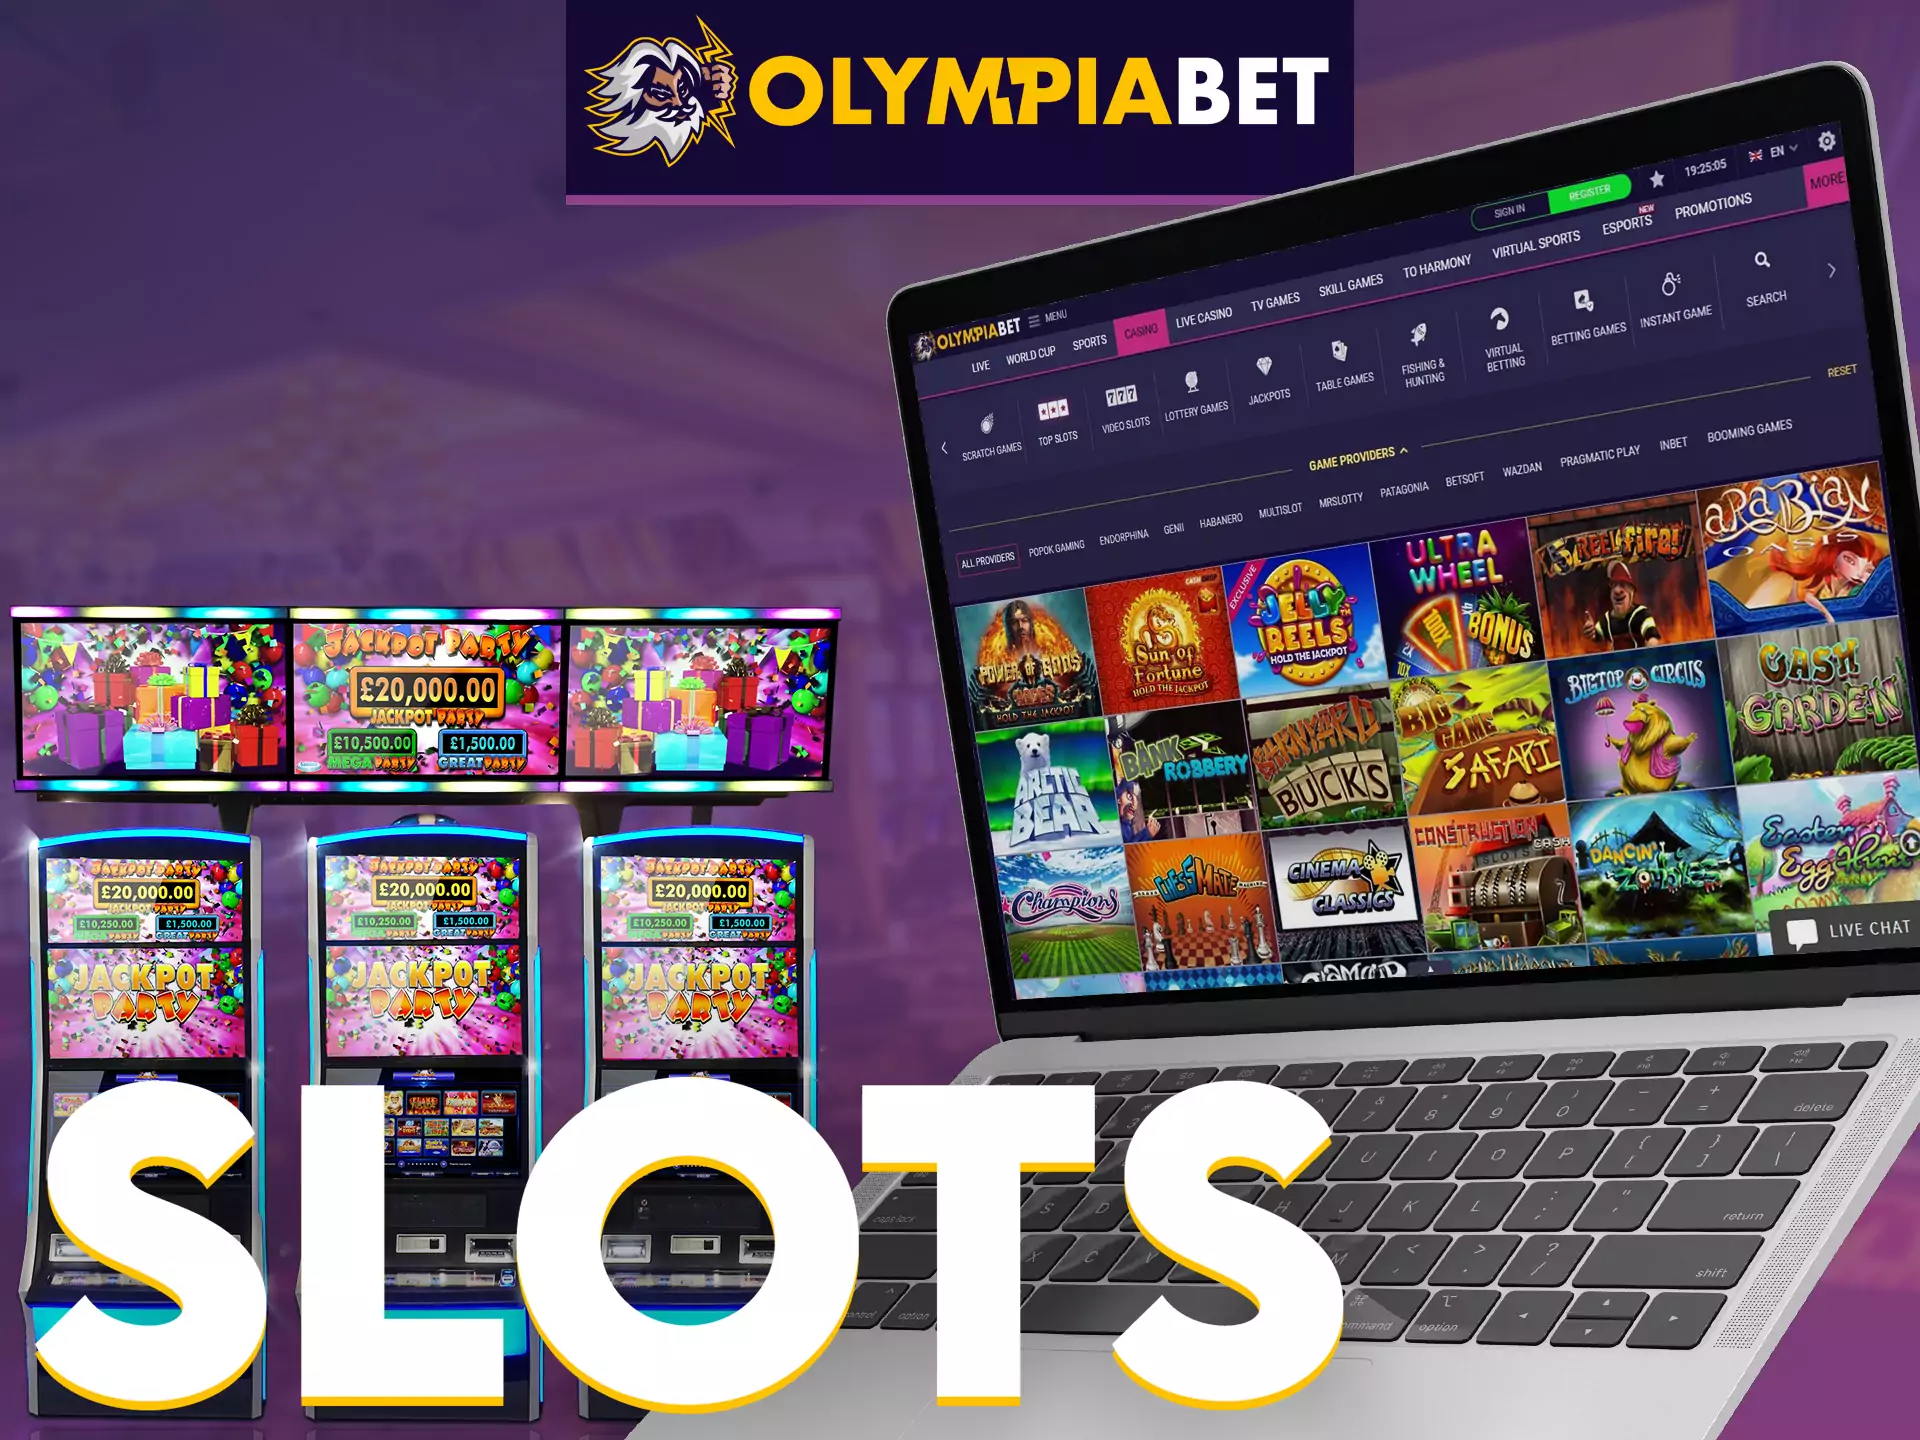 Try your luck on slots at OlympiaBet Casino.